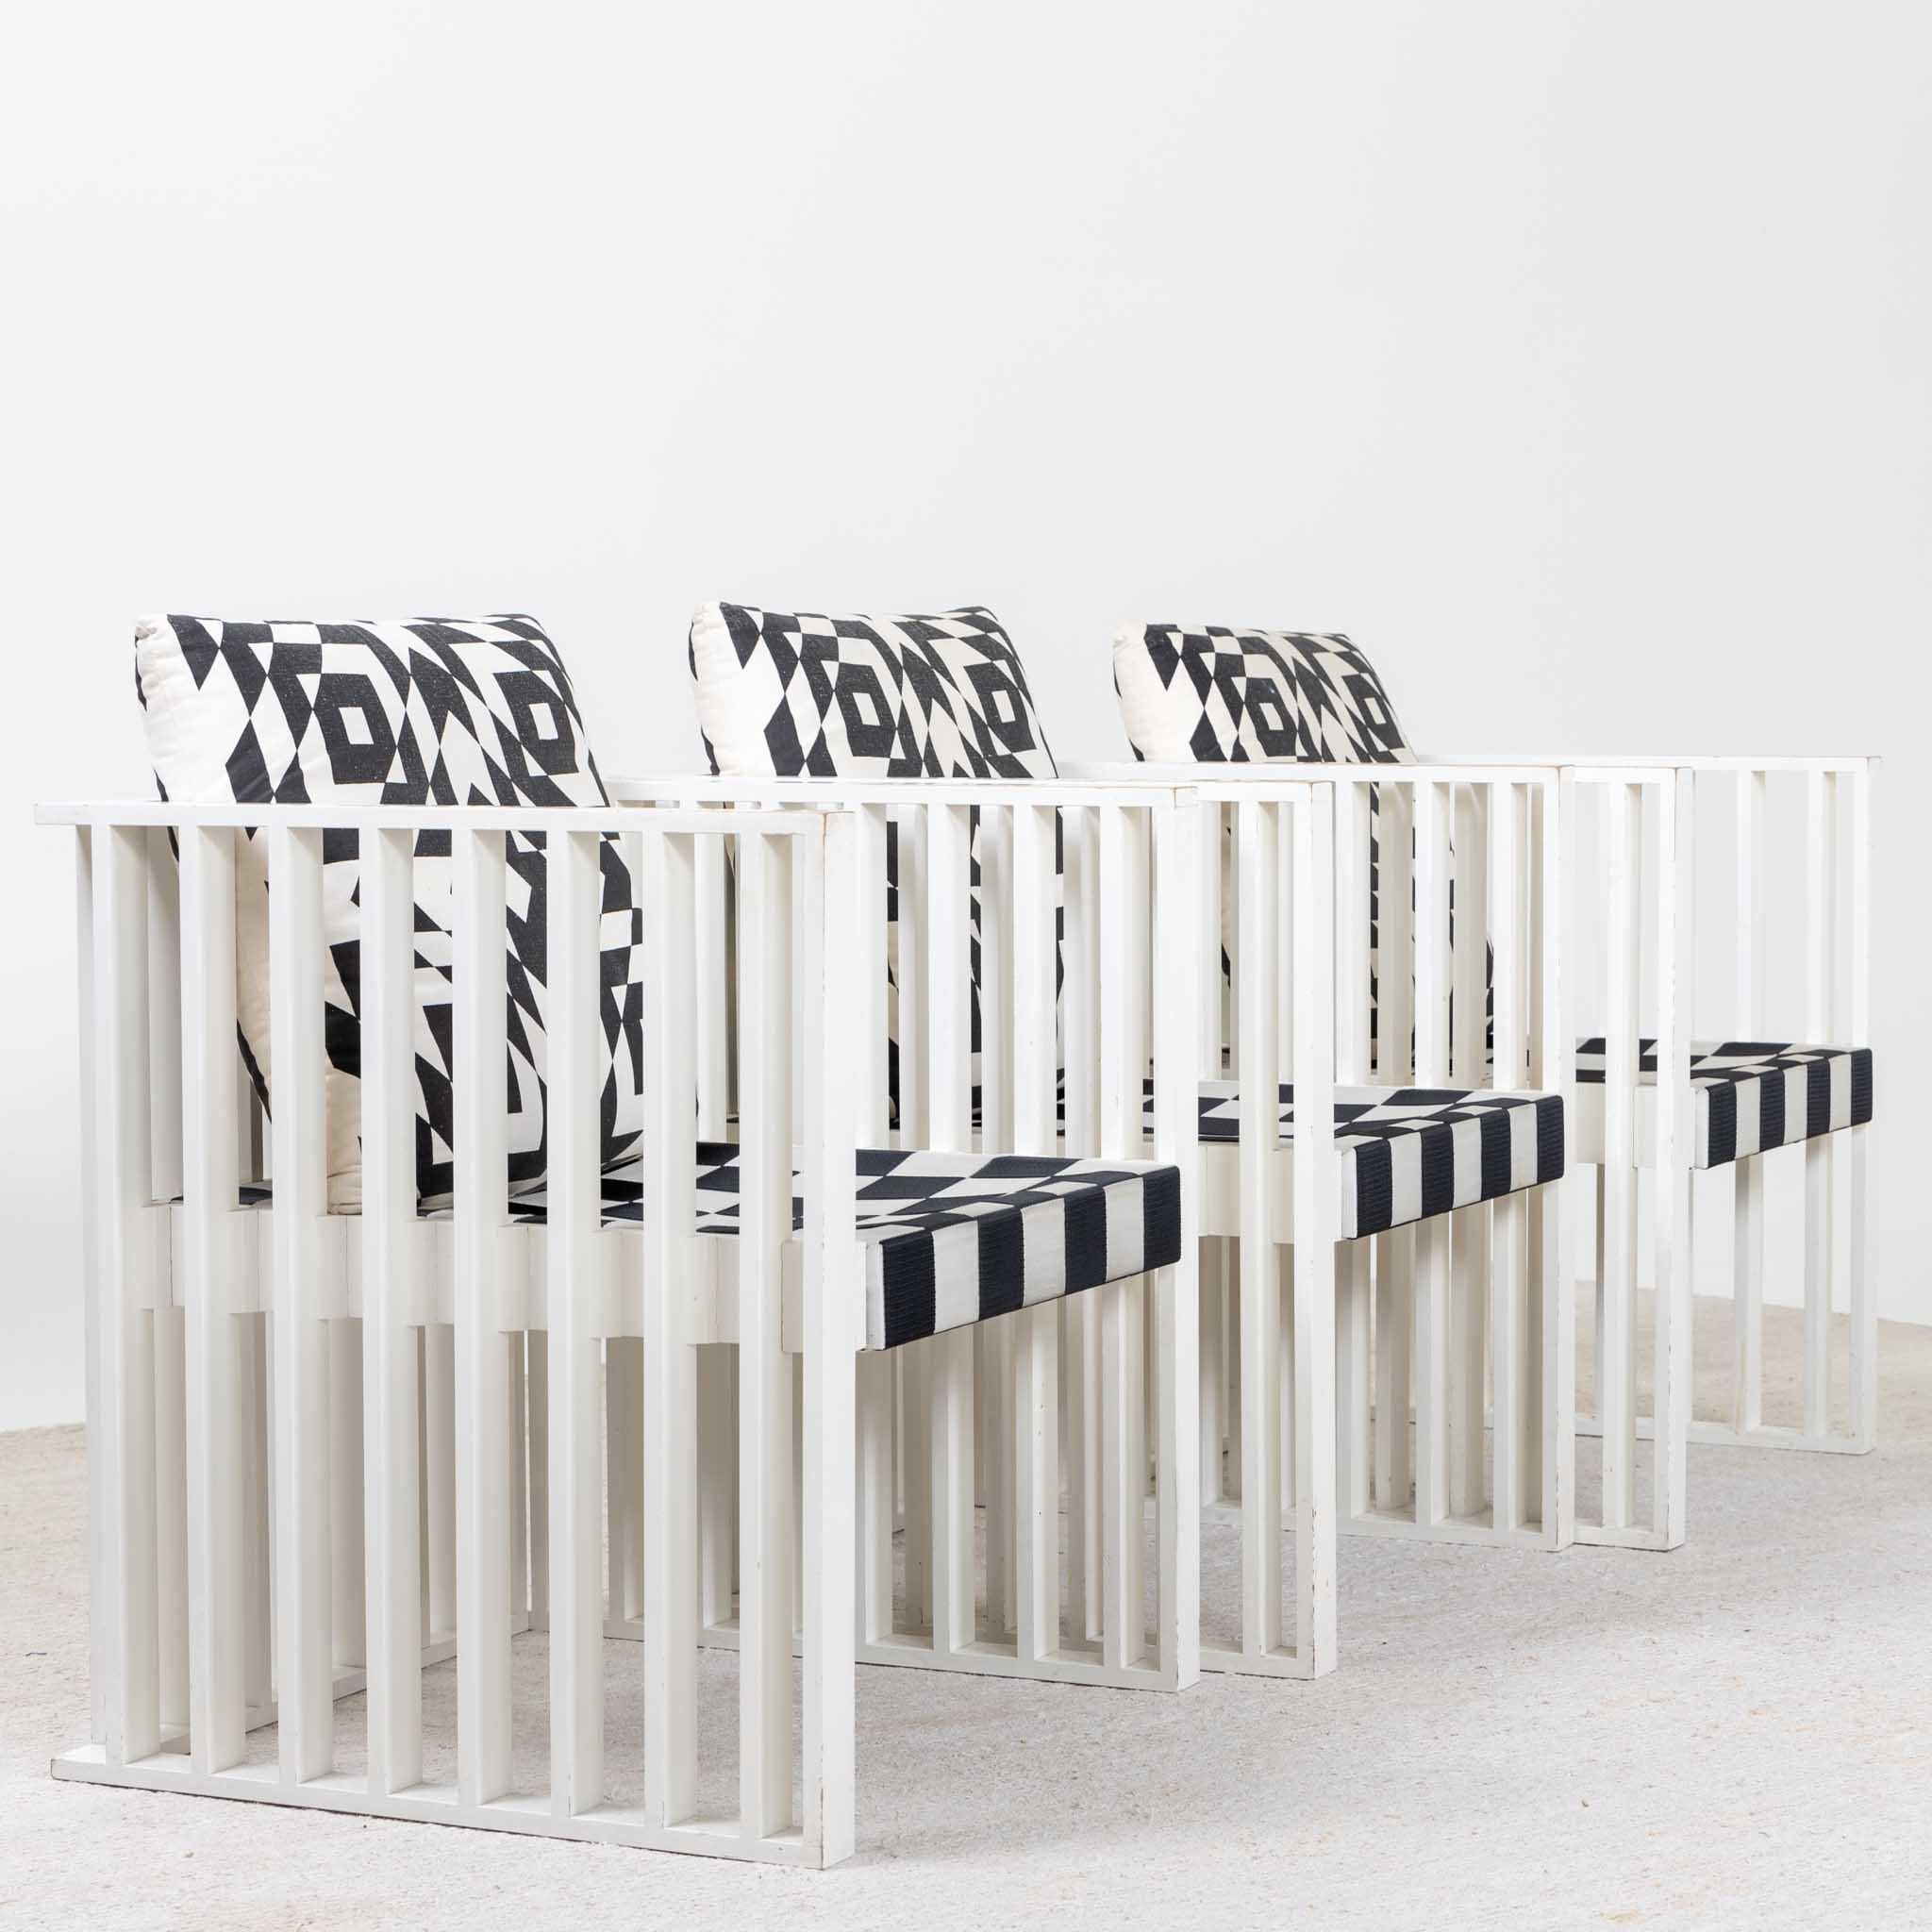 Four armchairs originally designed by Josef Hoffmann in 1903 for the Purkersdorf Sanatorium in Vienna. The geometric concept of the armchairs, consisting of white lacquered vertical struts, exemplifies the innovative power of the Vienna Secession